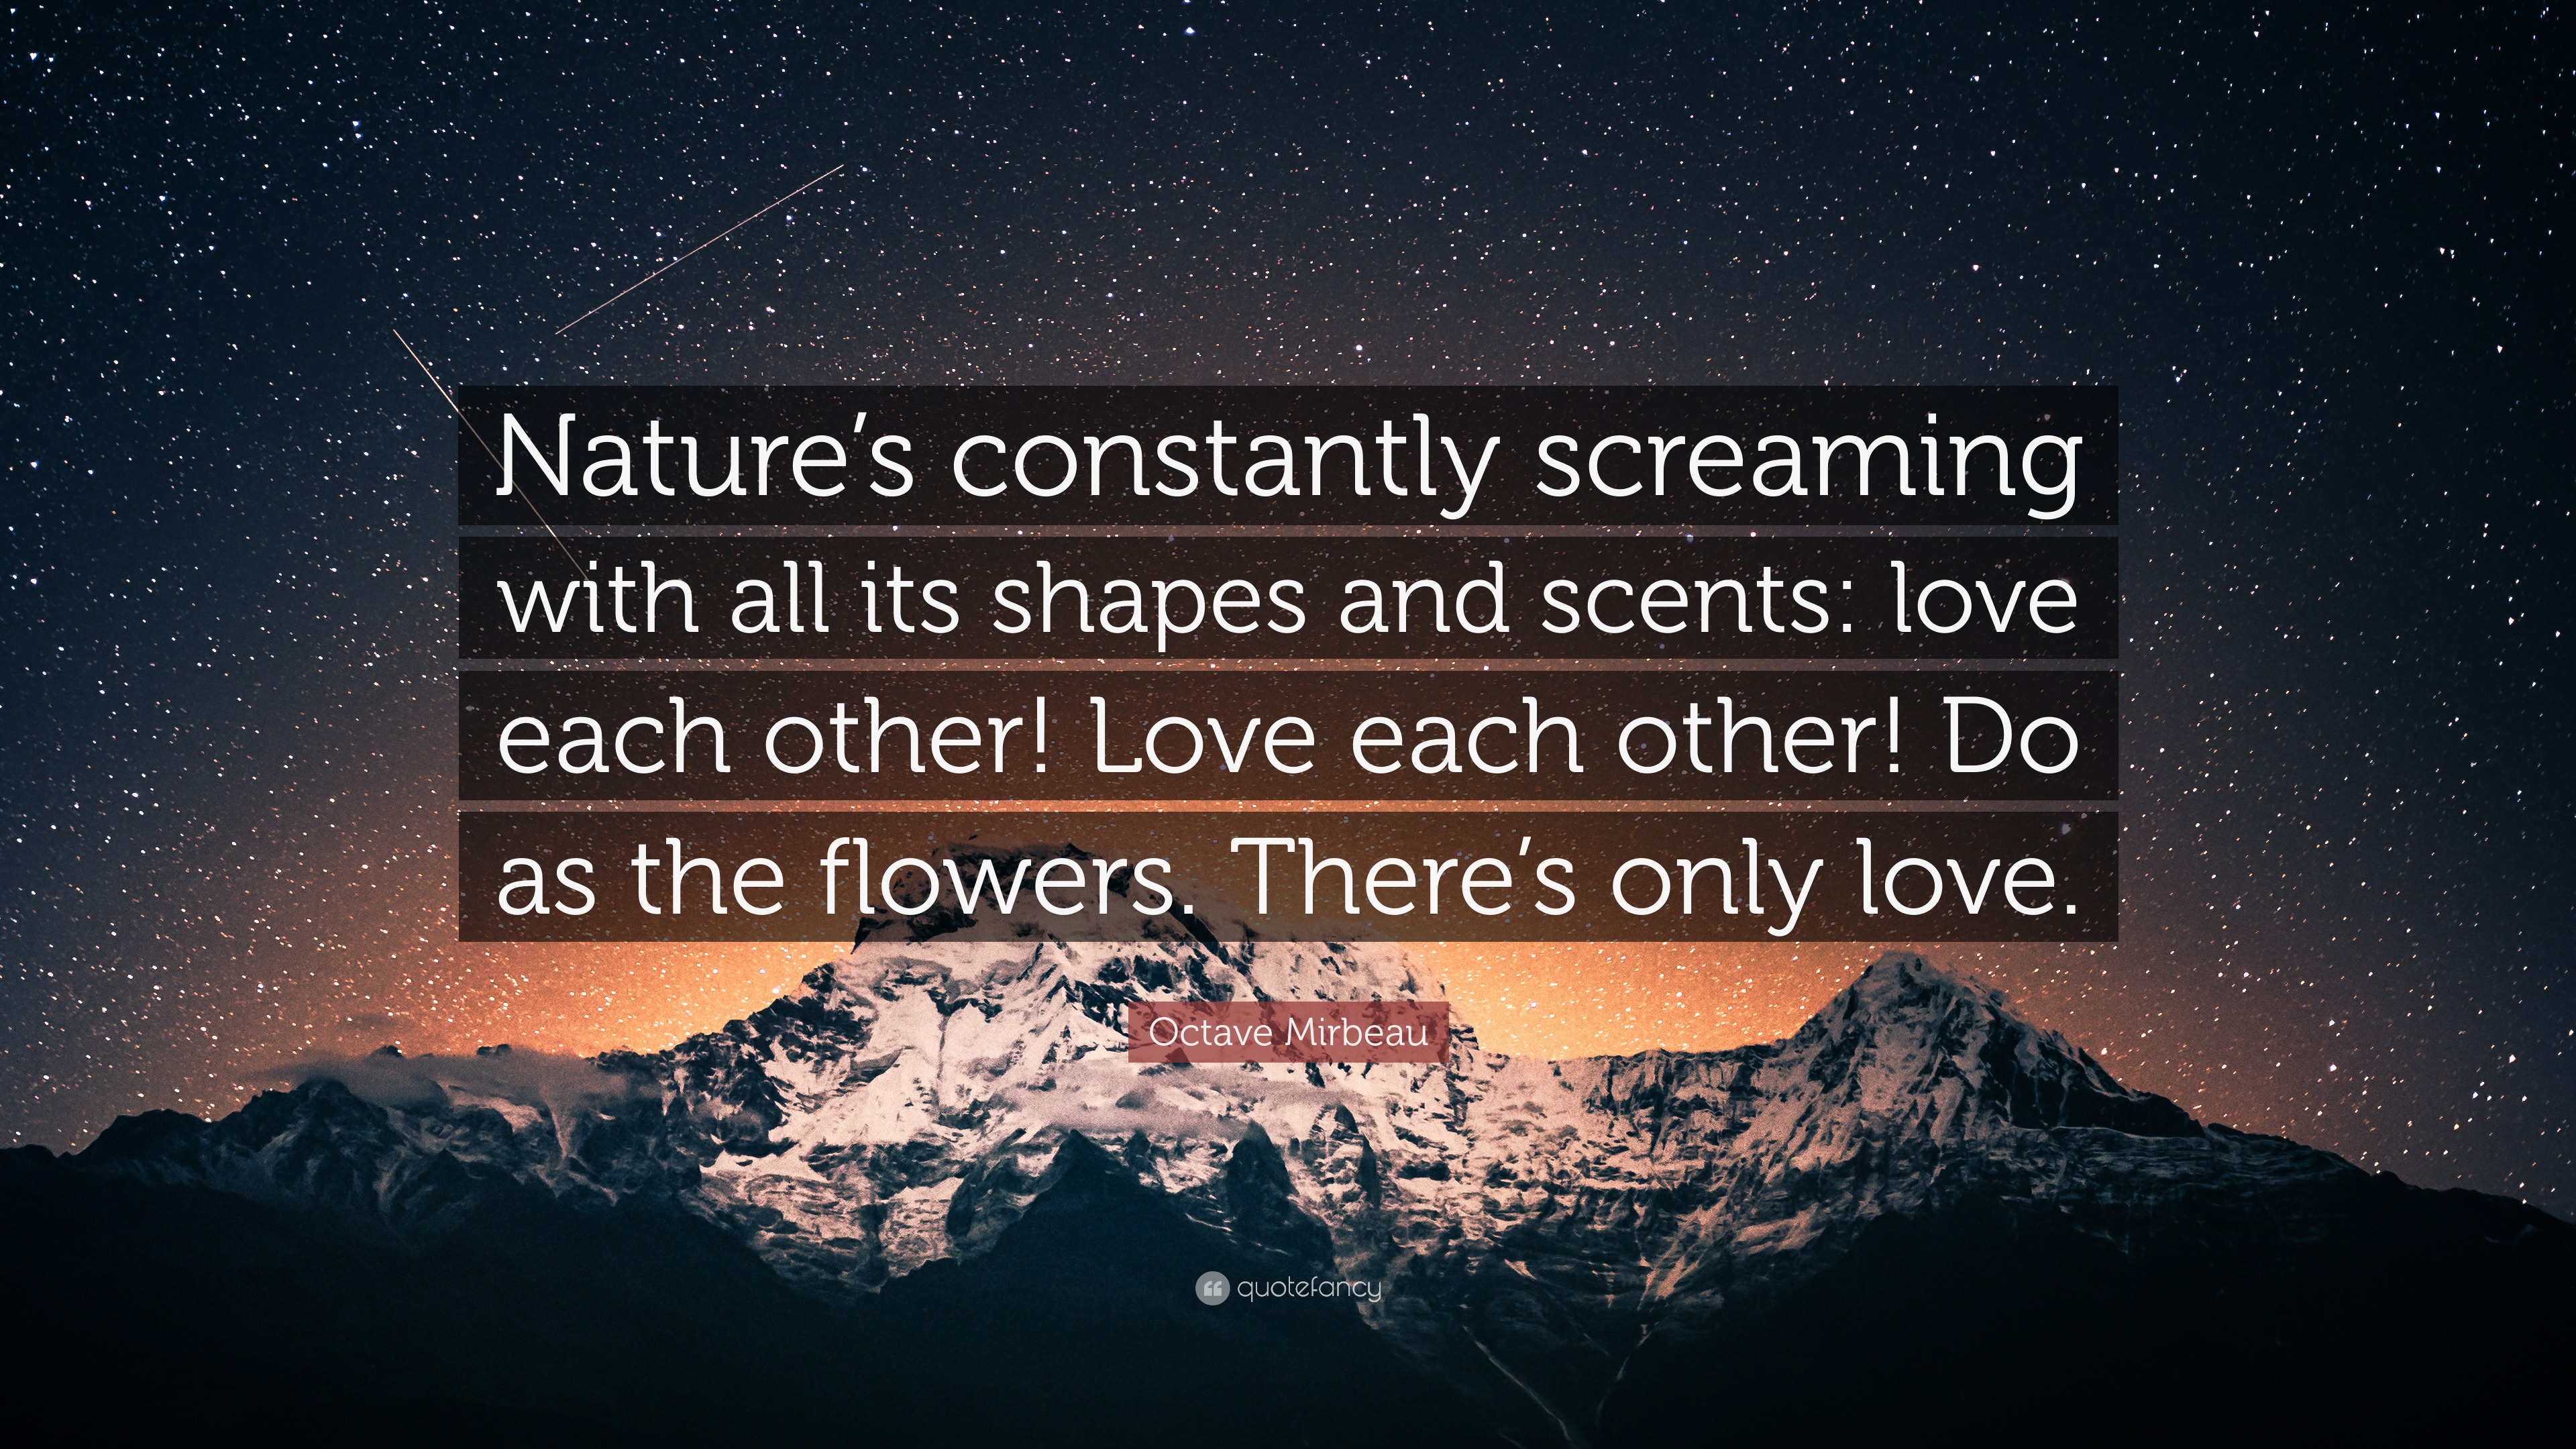 The Meaning of Love and Its Bittersweet Nature